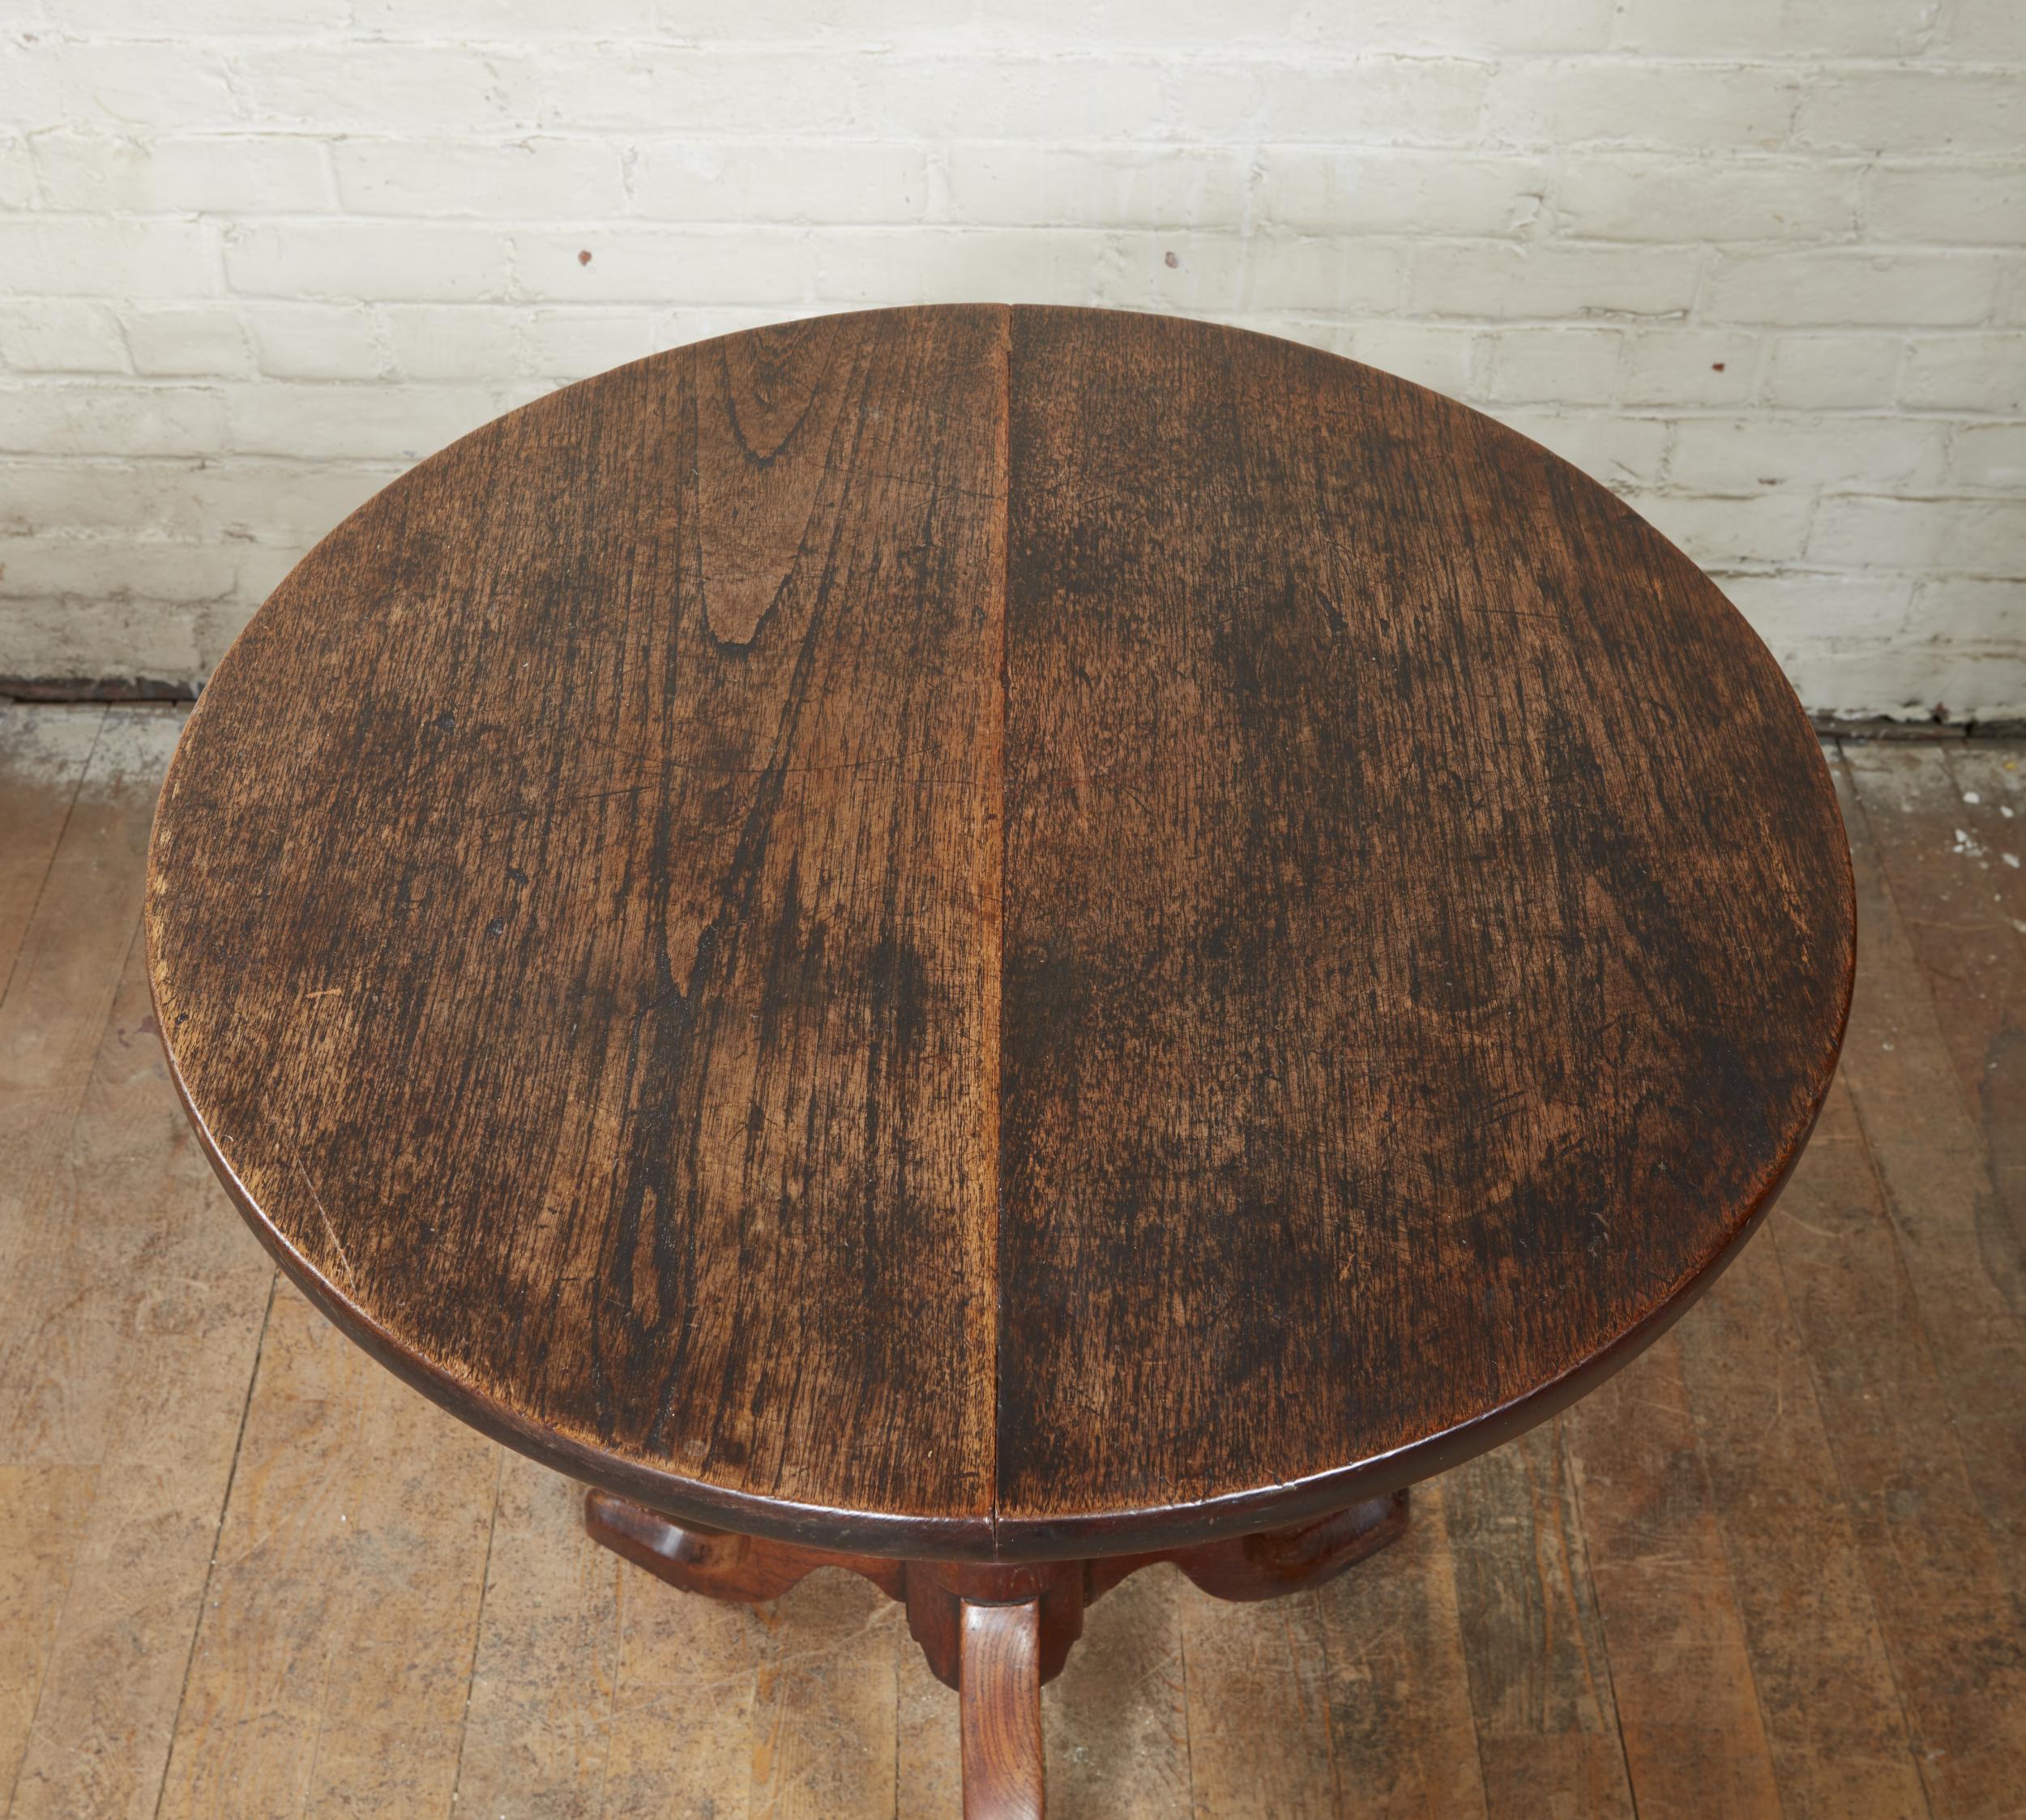 Turned Charming English Country Wine Table For Sale